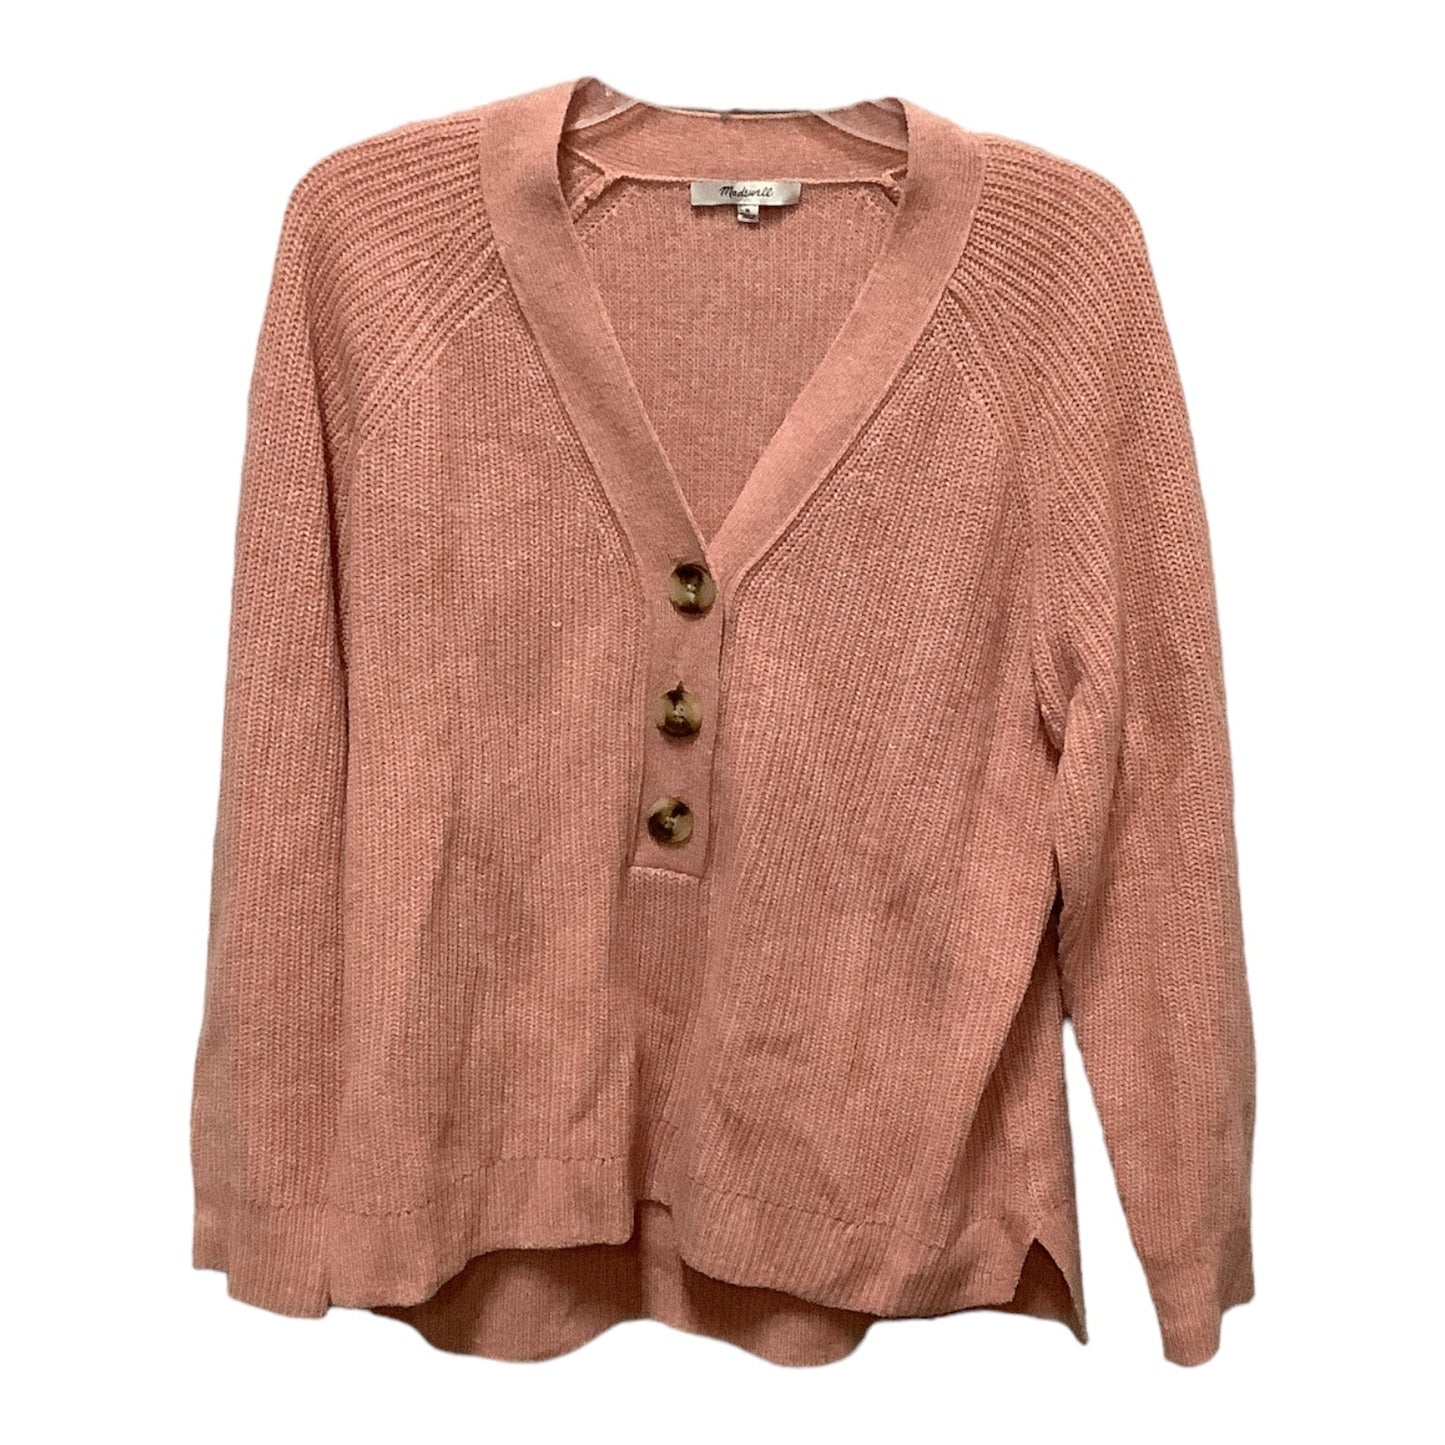 Cardigan By Madewell  Size: M